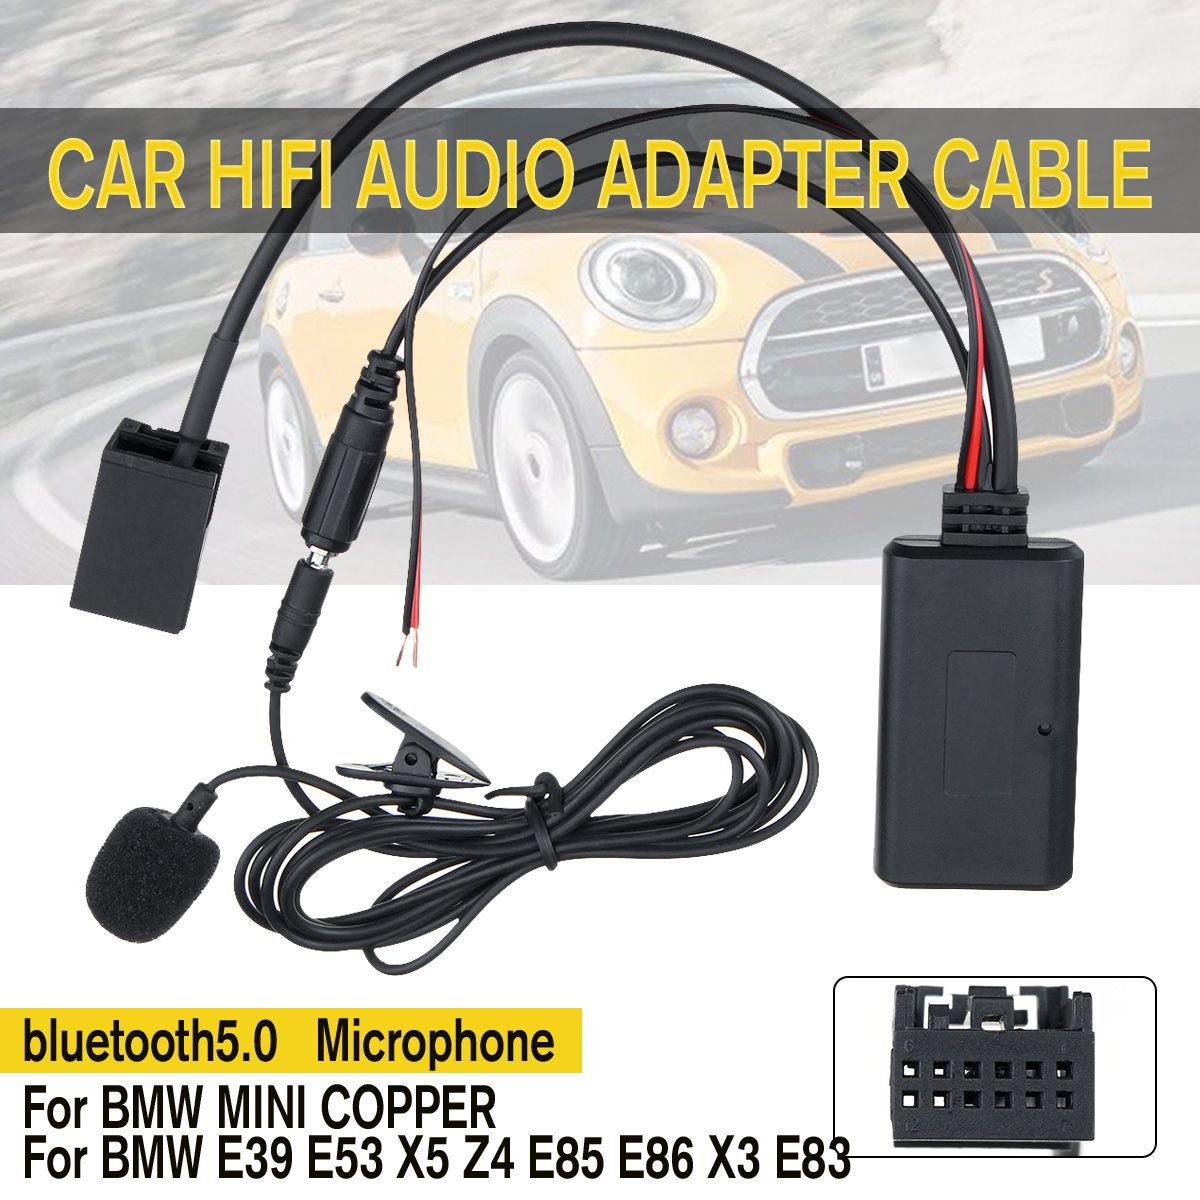 Car-bluetooth-Audio-Cable-Adapter-AUX-Cable-12V-With-Micro-For-BMW-1667609